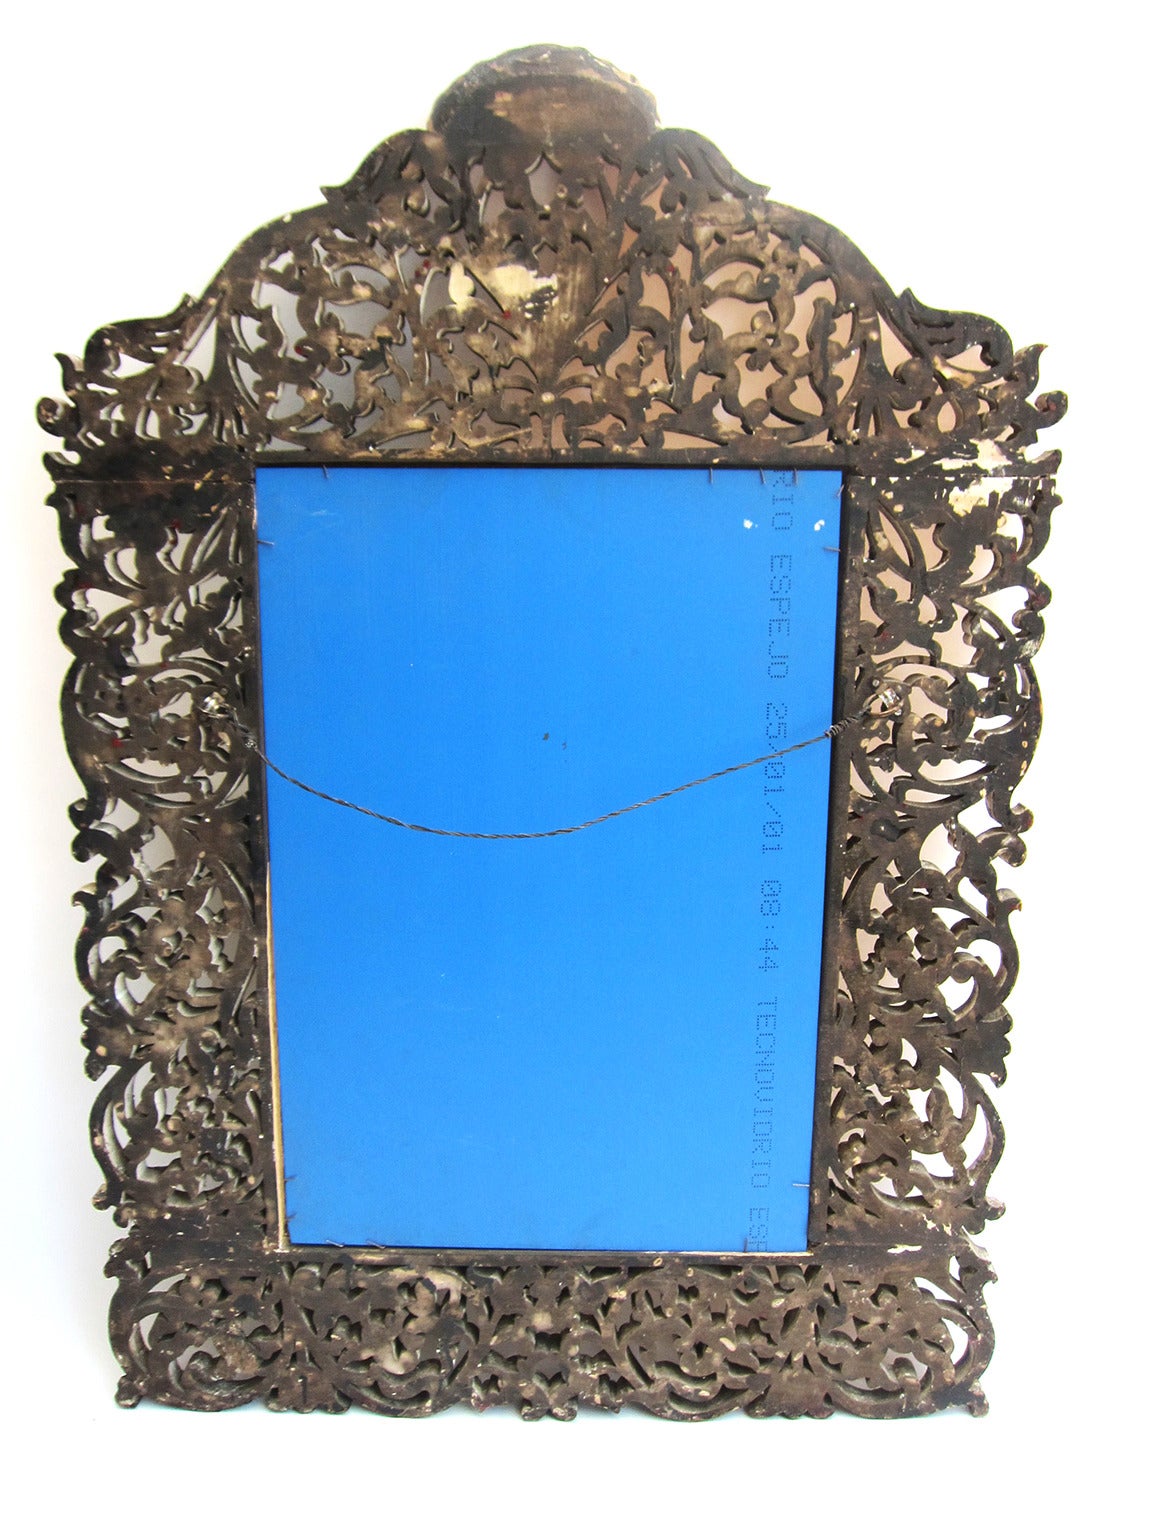 Intricately hand-carved mirror of ayacahuite wood (of the Mexican pine family). Done with great skill and attaining the opulence of the Baroque period. Mirror insert measures 36.5 x 25